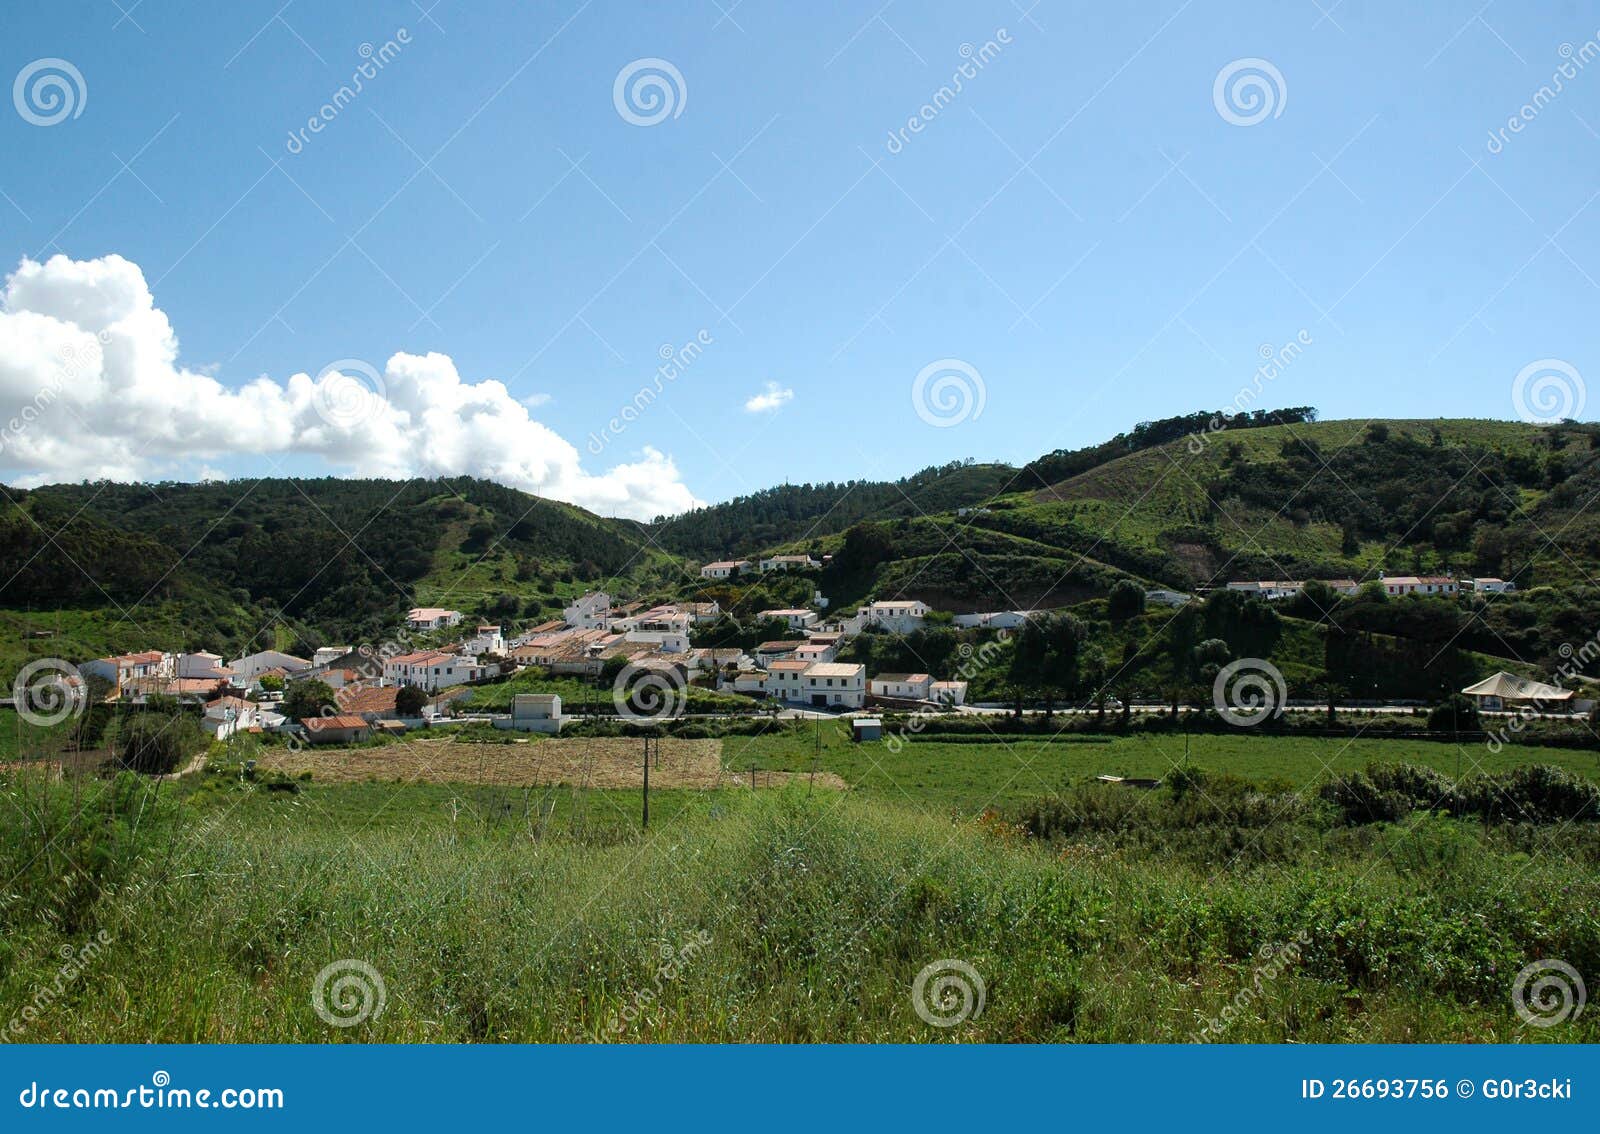 travel southern portugal, bordeira village, nature and peace